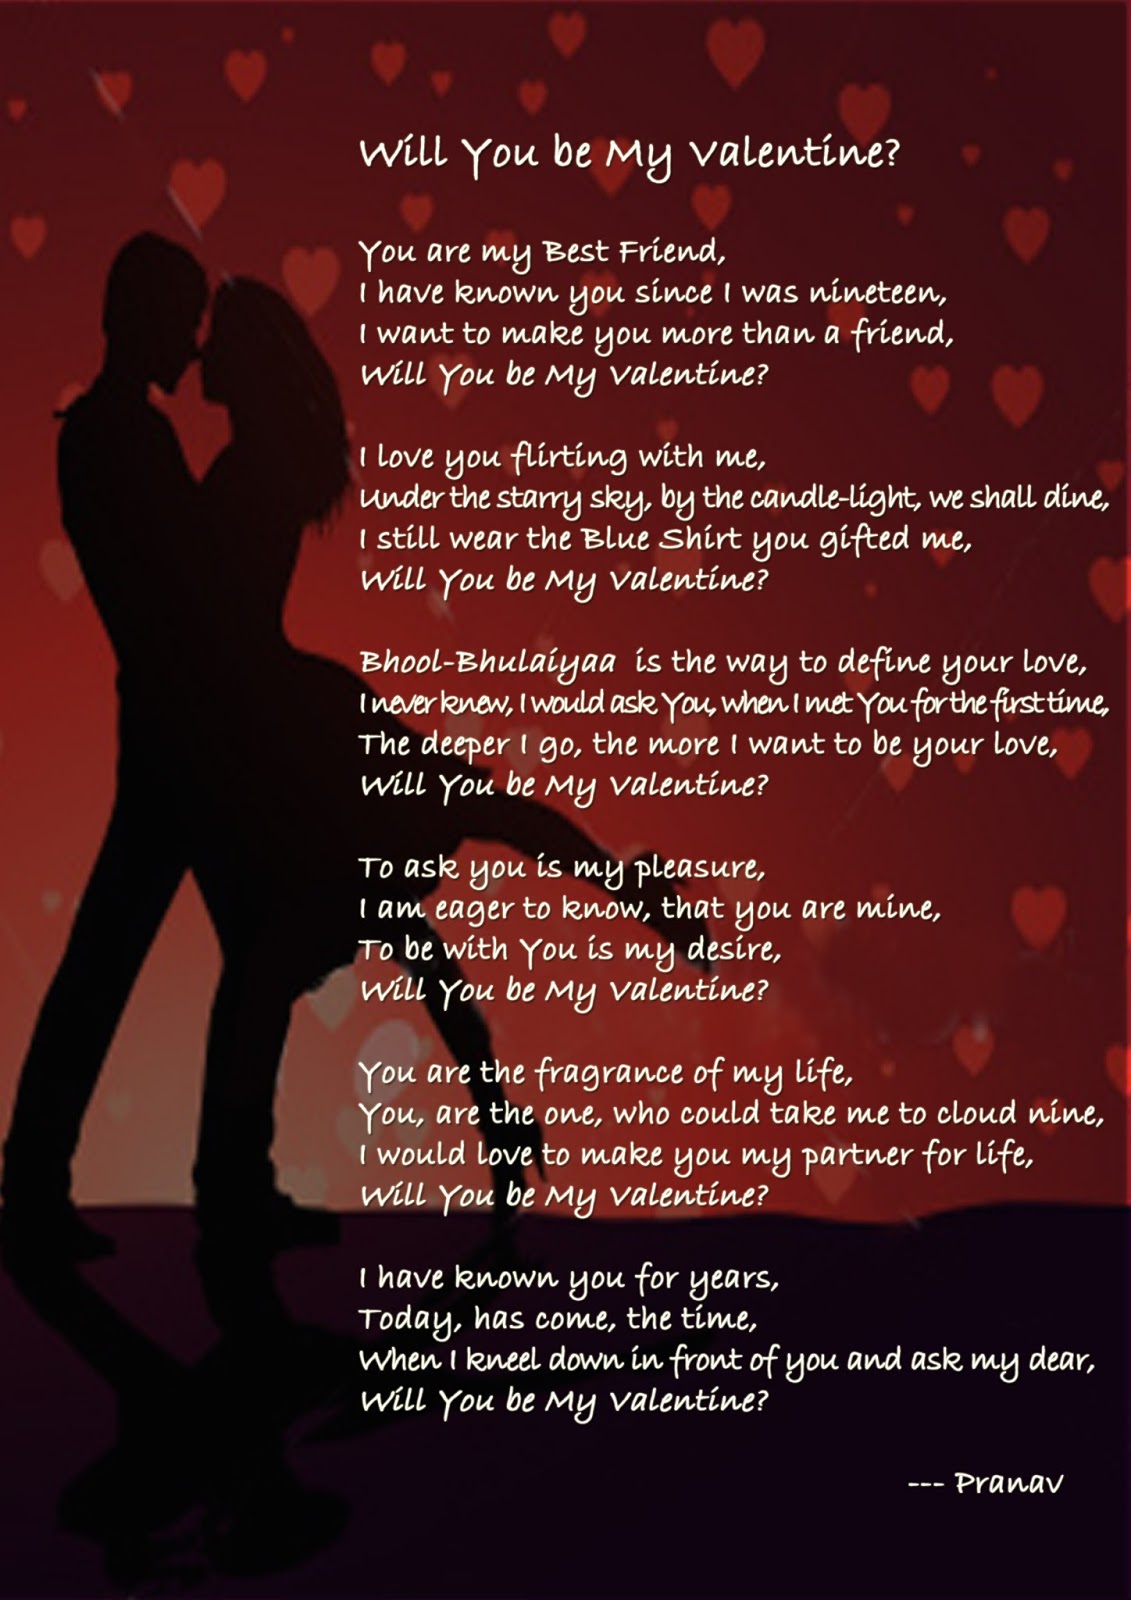 Happy Valentines Day Poems for Boyfriend Gifts This Blog About Health